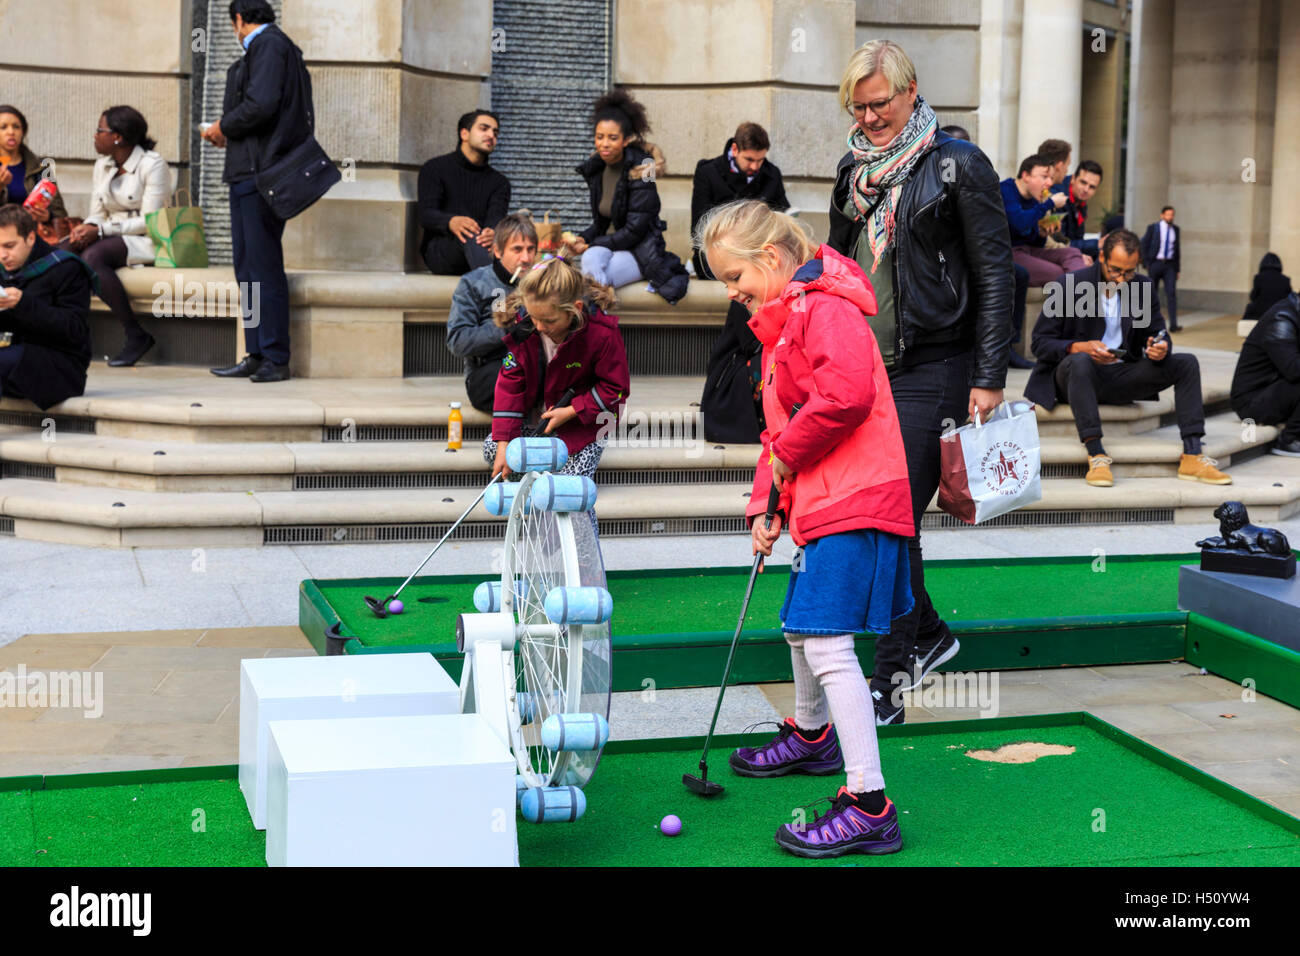 Paternoster Square, City of London, UK, 18th Oct 2016. City workers and visitors enjoy a round of crazy golf on Paternoster Square near St Paul's Cathedral in the City of London. The event is free for all to play and remains at Paternoster Square from 18th Oct to 21st Oct with competitions and a play off cup. The course includes a miniature Tower Bridge, London Eye and other iconic buiildings Credit:  Imageplotter News and Sports/Alamy Live News Stock Photo